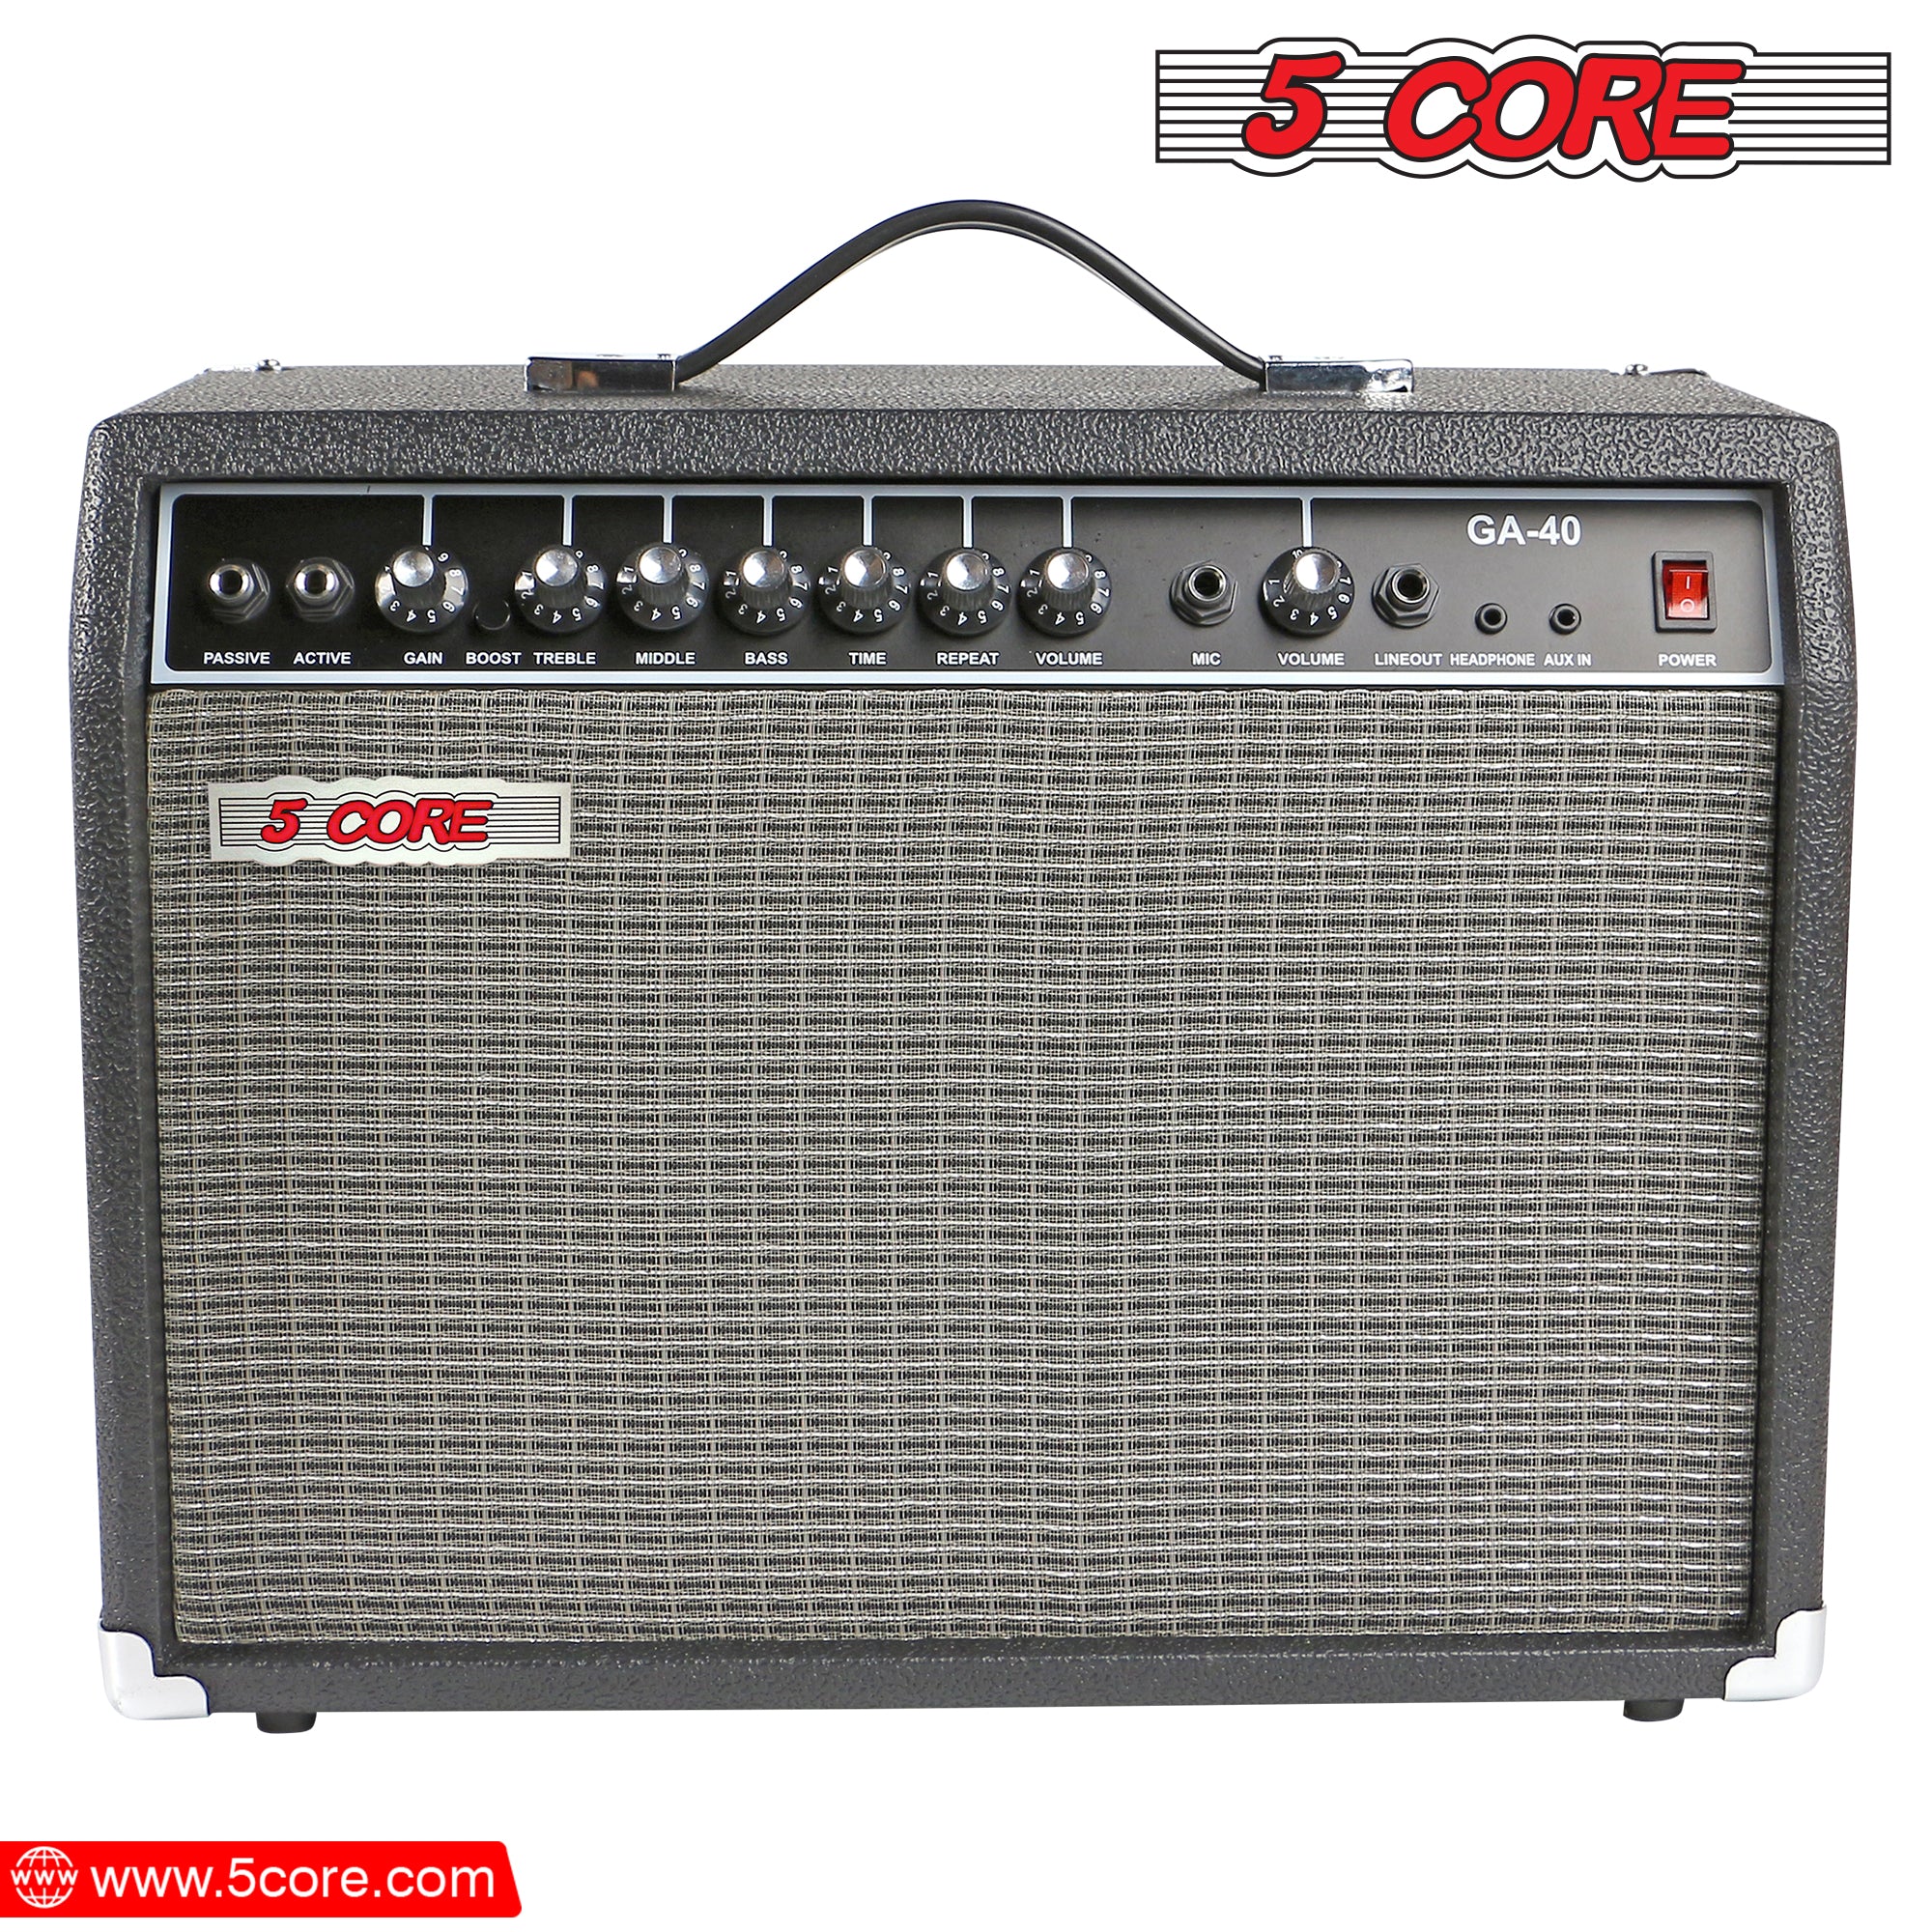 5 Core Mini Guitar Amp: Portable Amplification at Its Best